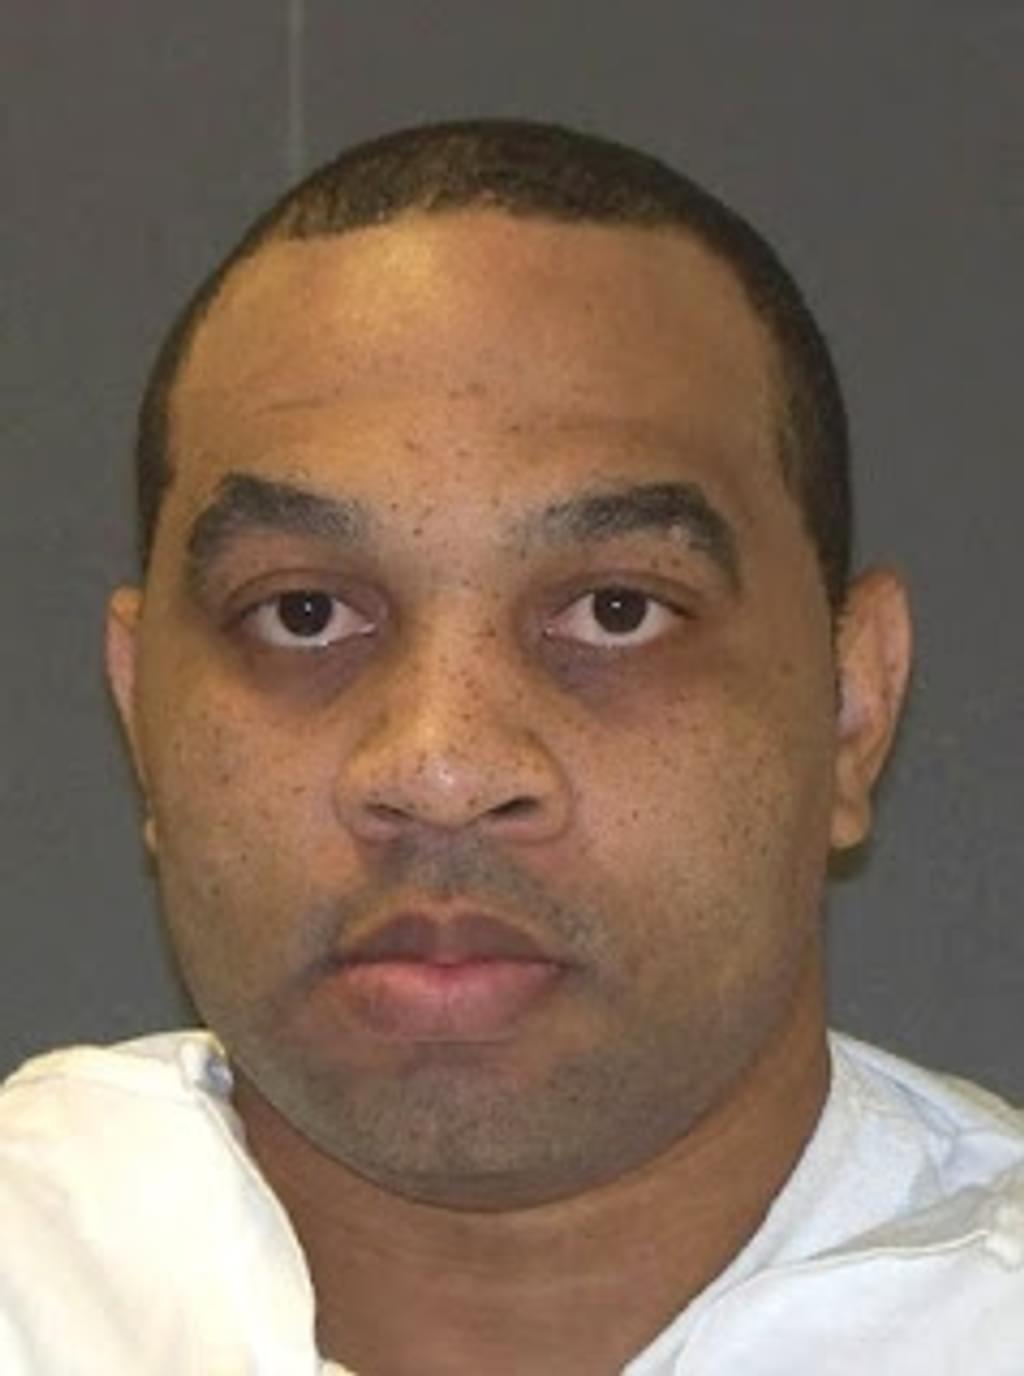 Texas Appeals Court Orders Hearing on False Forensic Testimony, Extends Stay of Execution